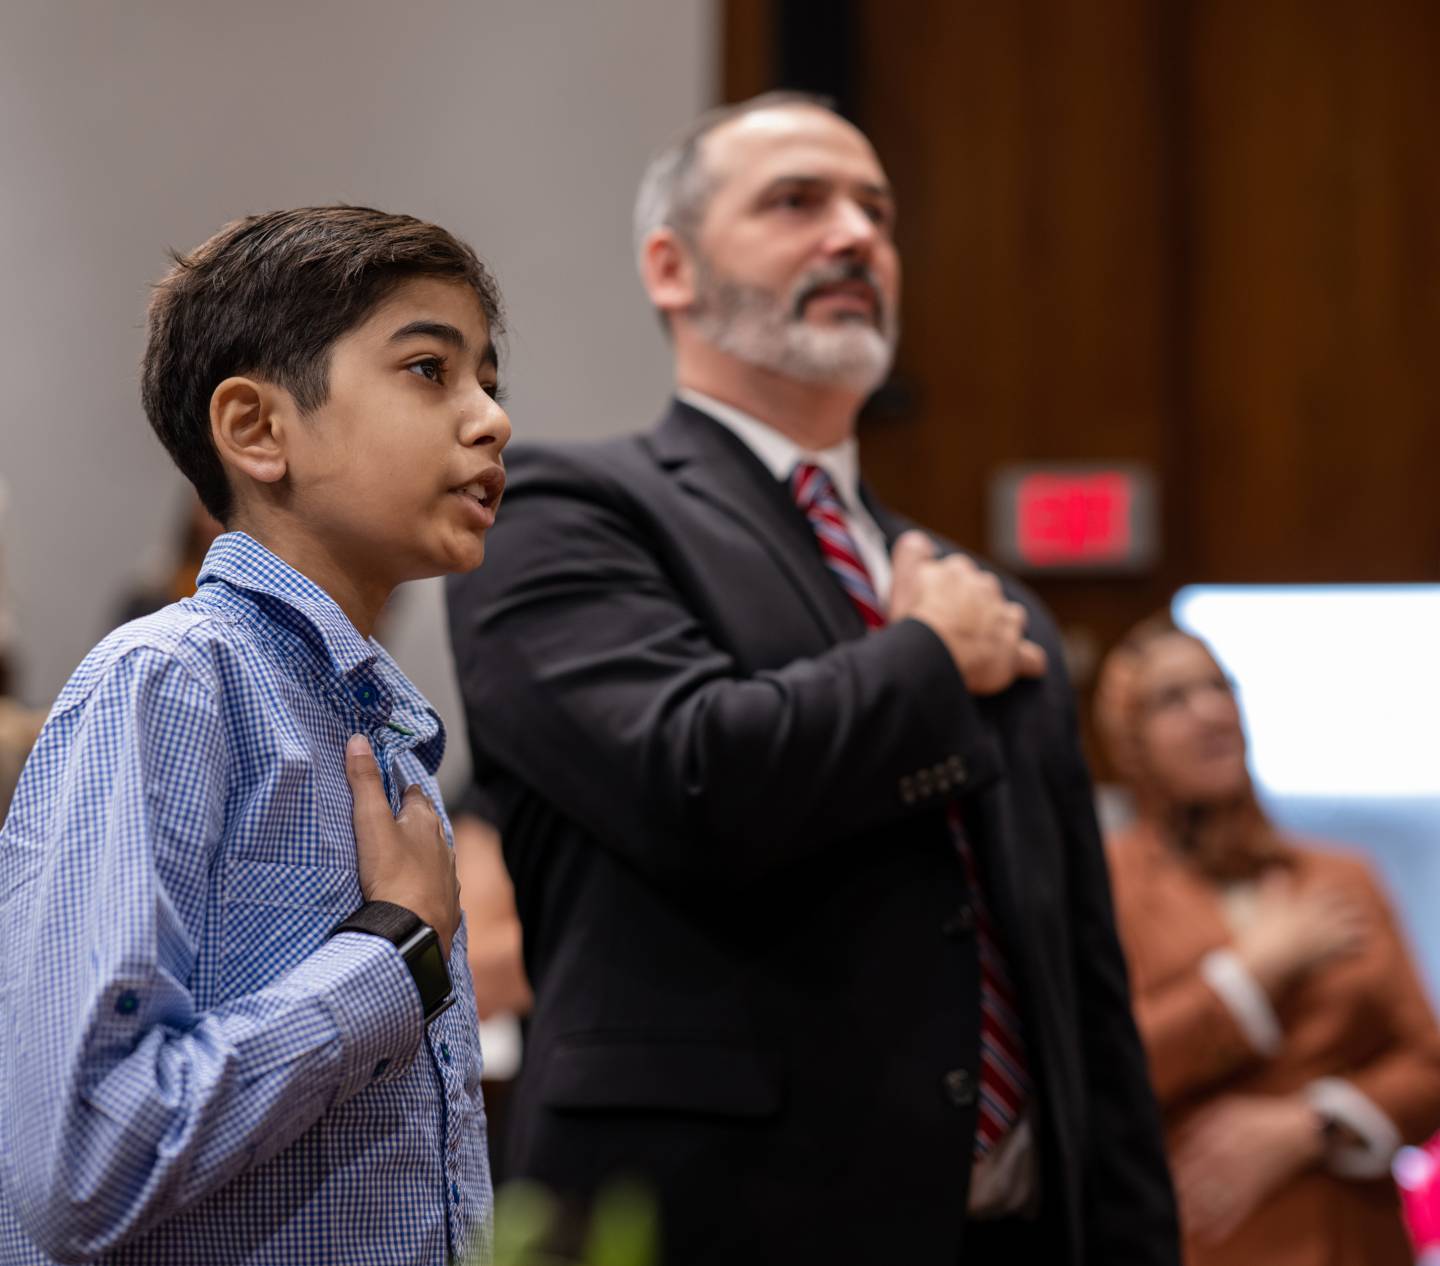 Aarush Tripathi, 13, joins Keith Dorr of U.S. Citizenship and Immigration Services